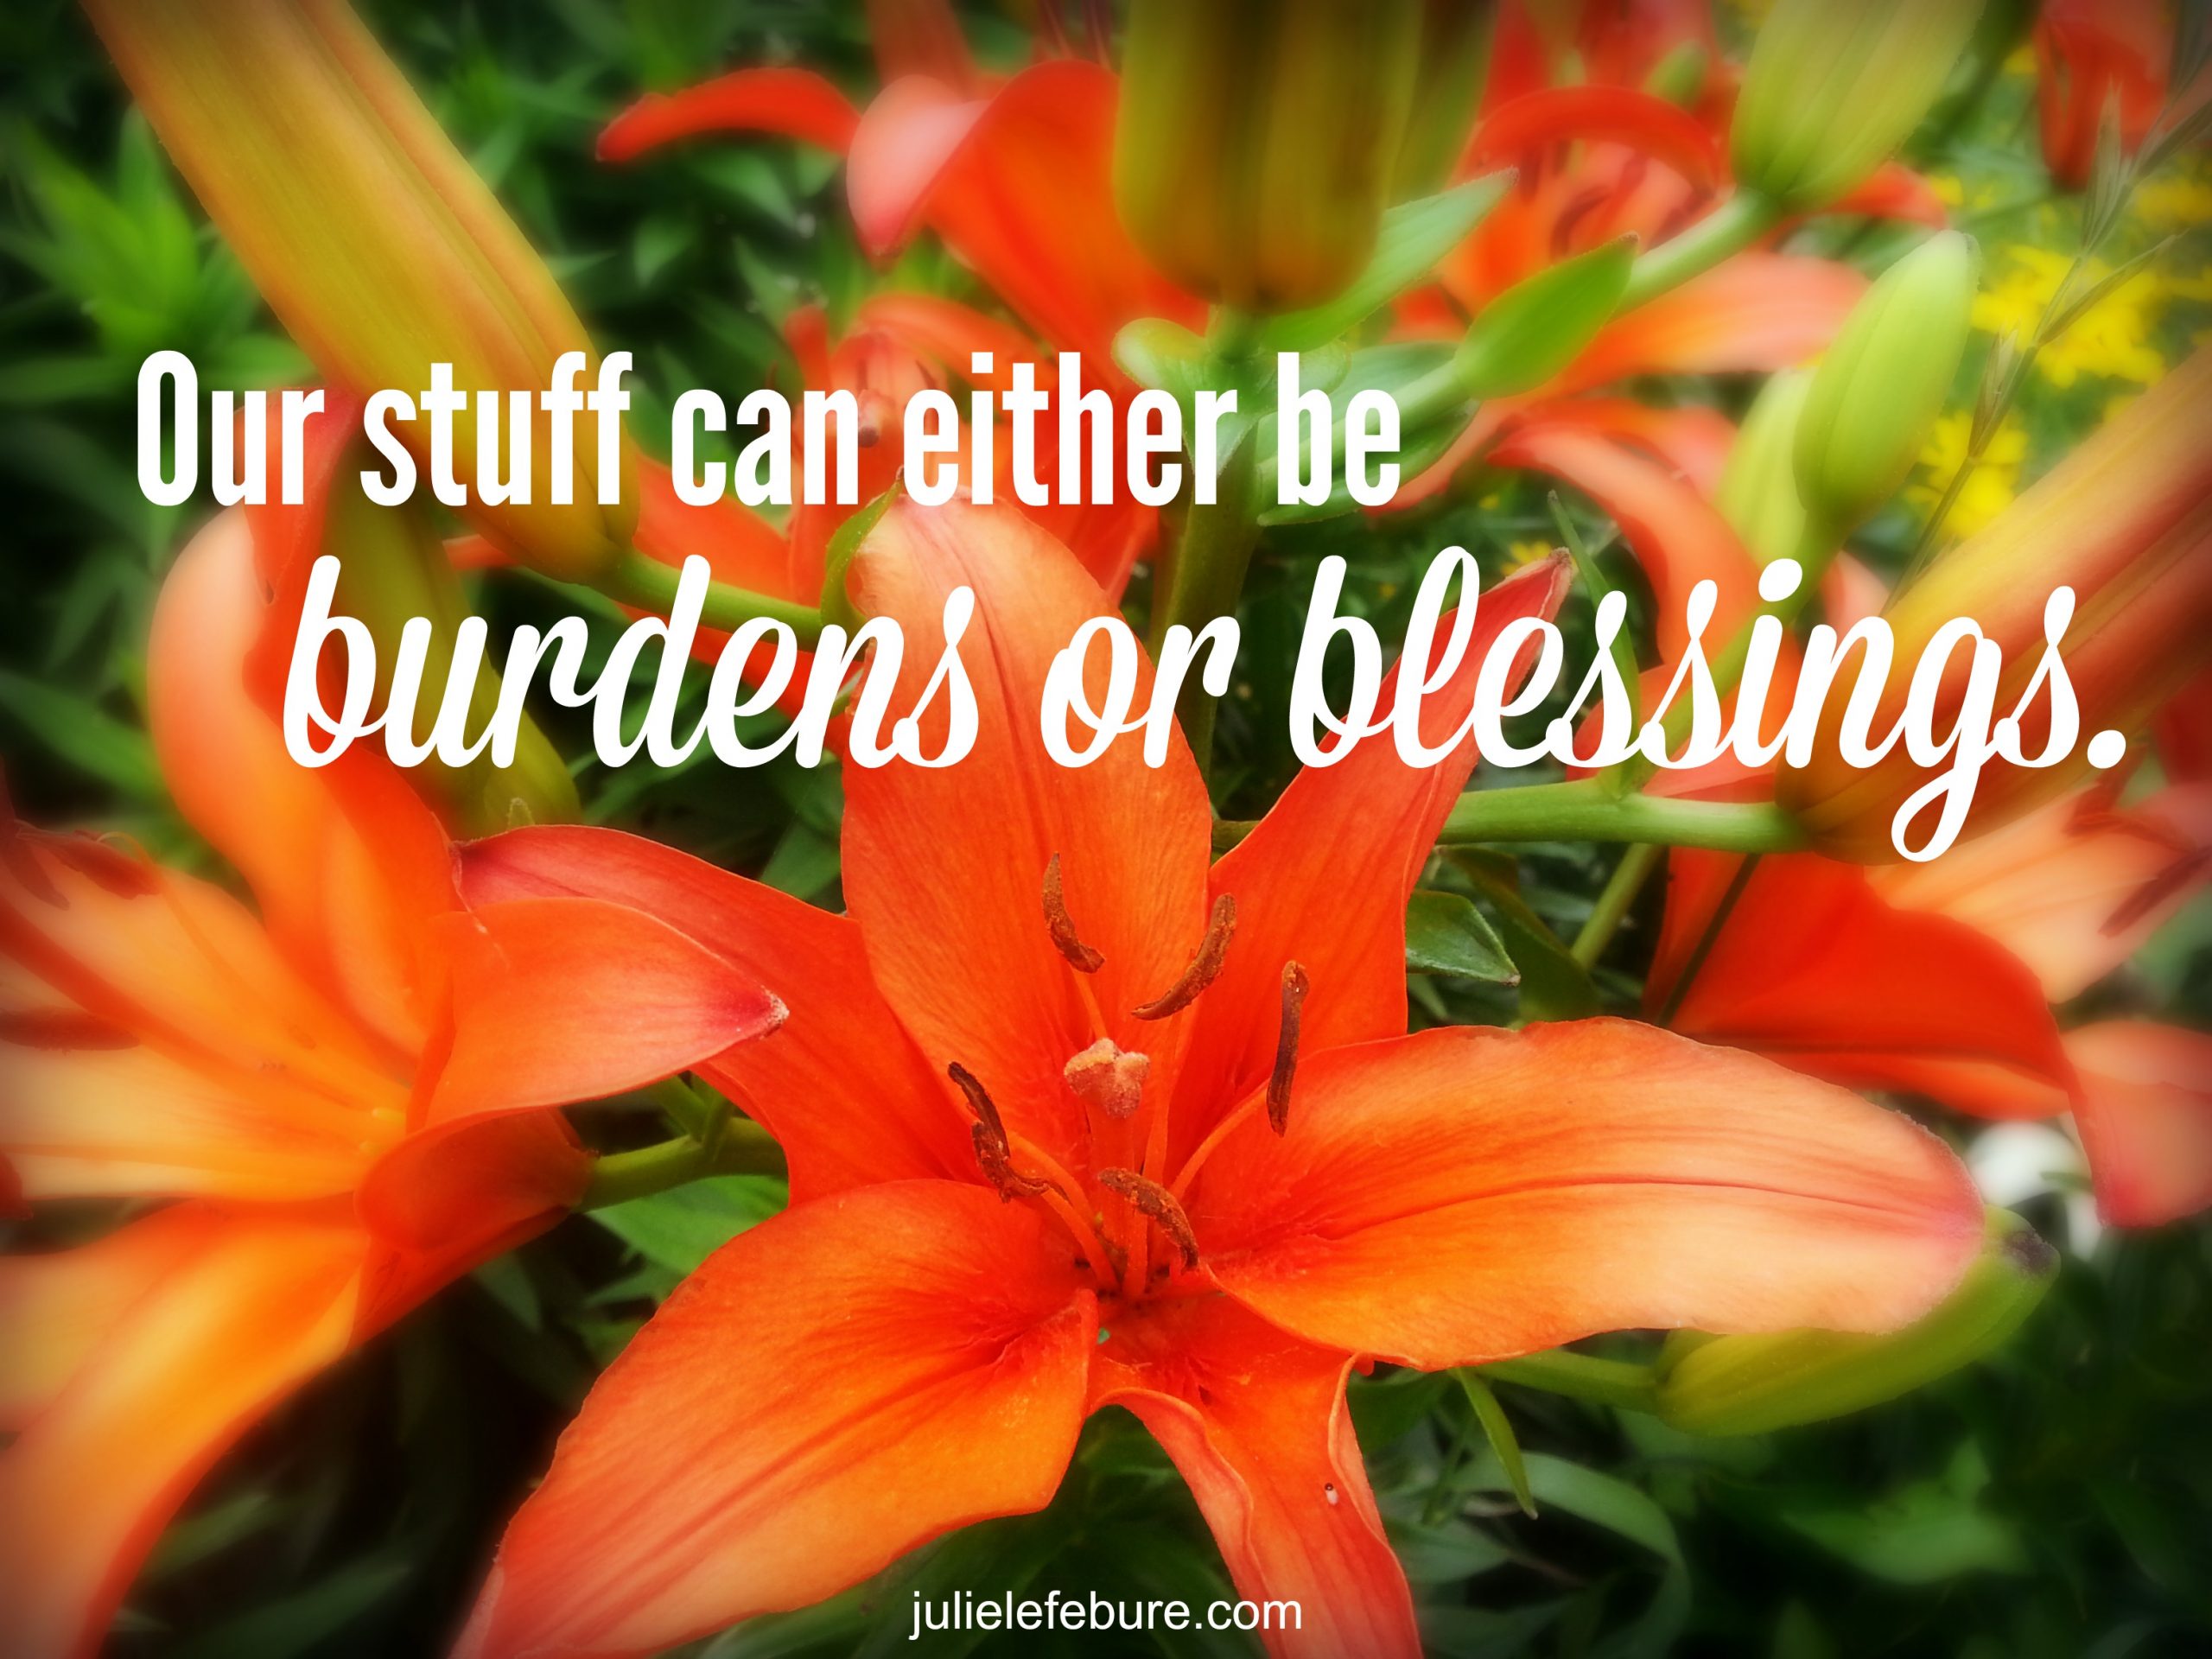 Is The Stuff We Own Burdens Or Blessings?